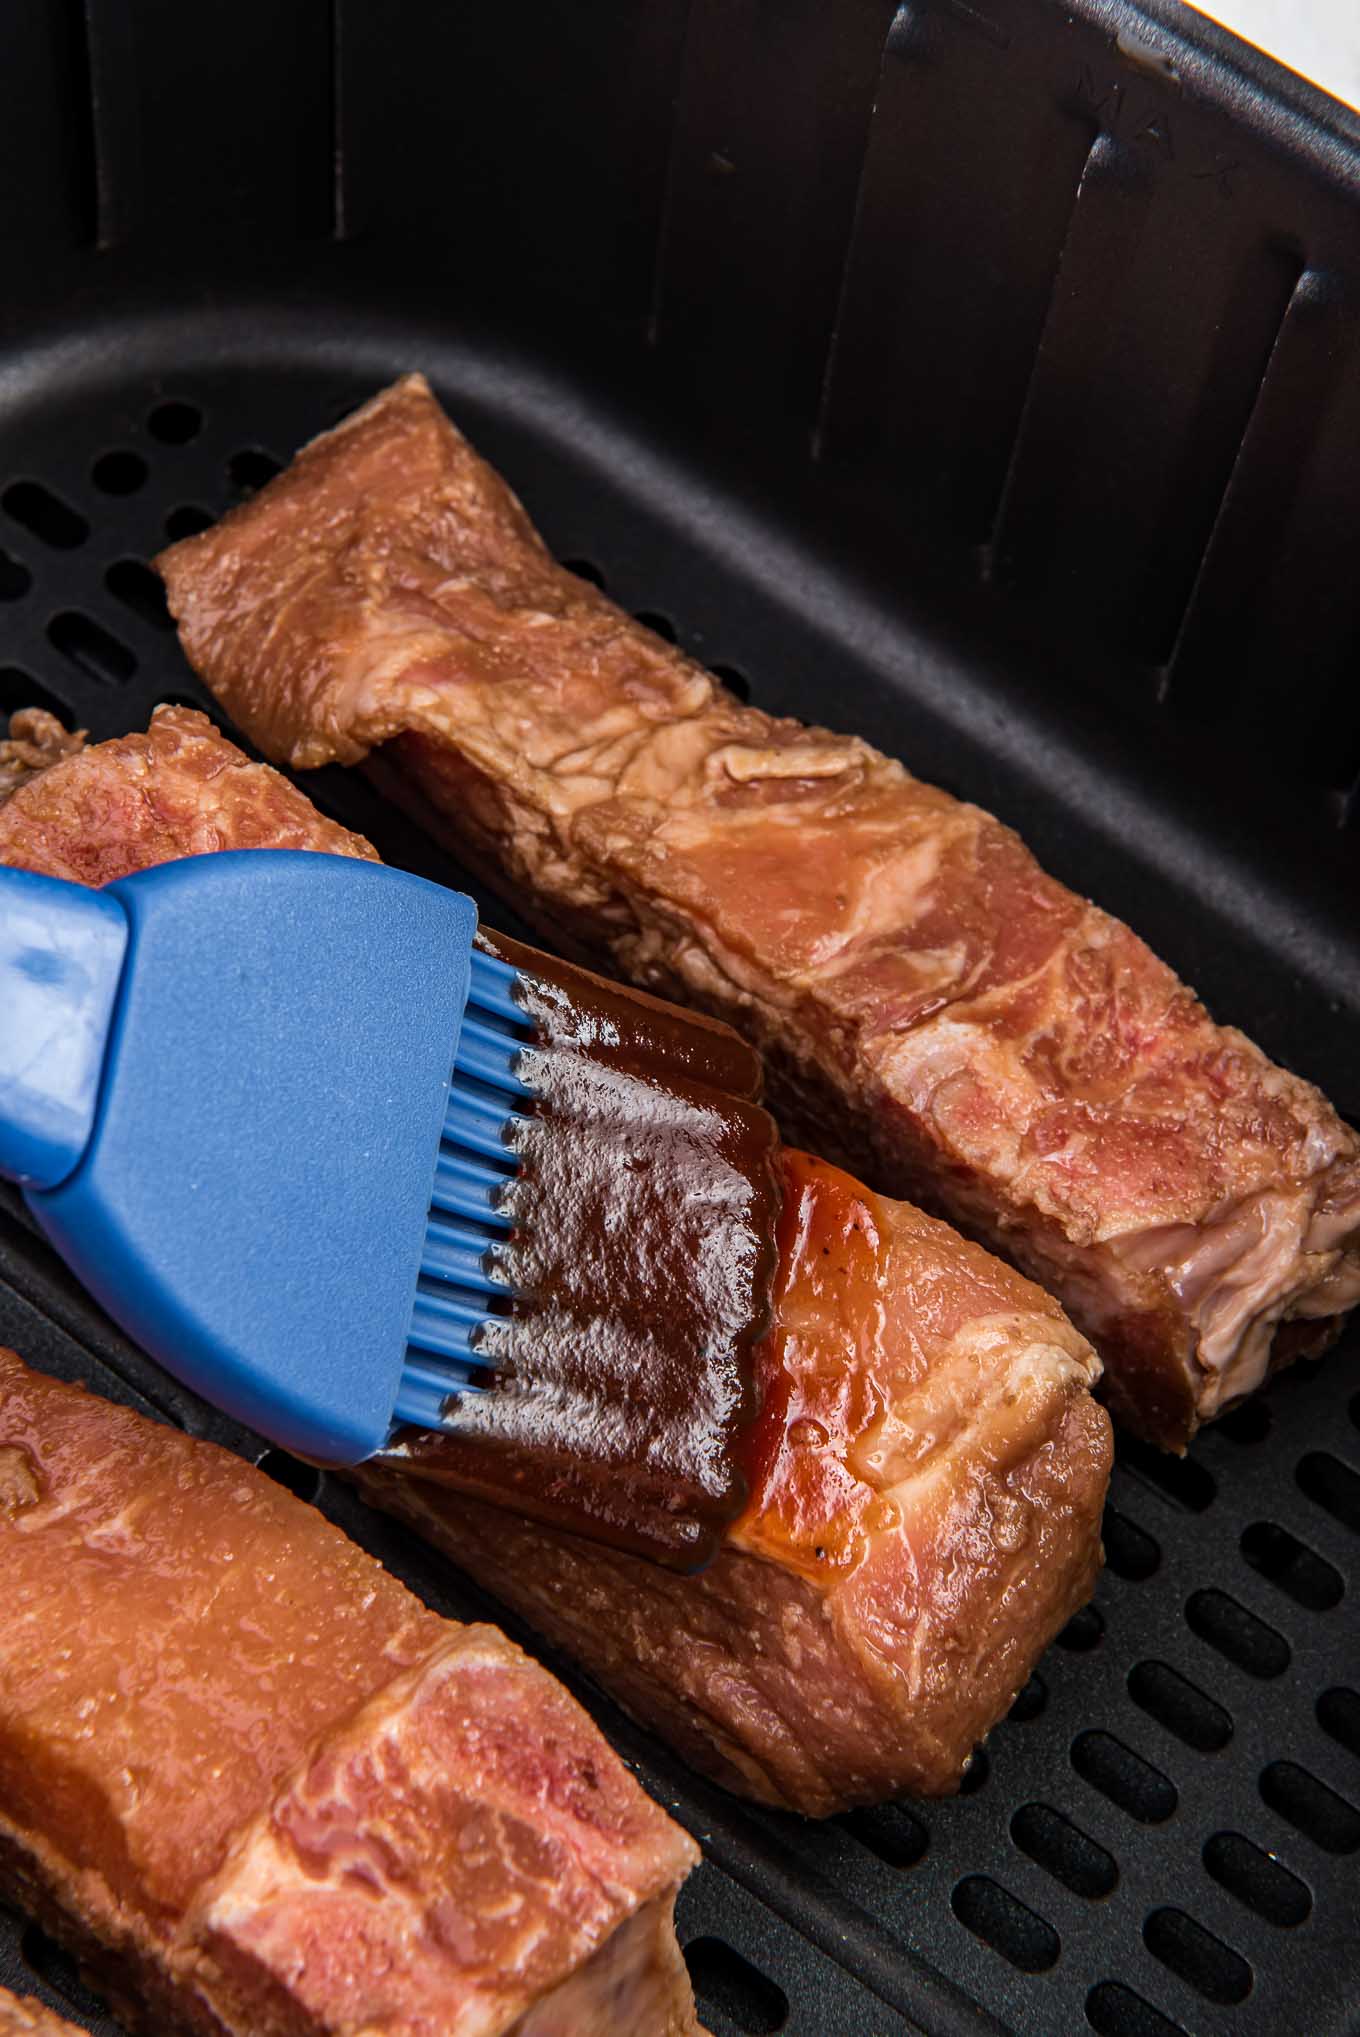 Brushing the country style ribs with BBQ sauce in the air fryer basket.